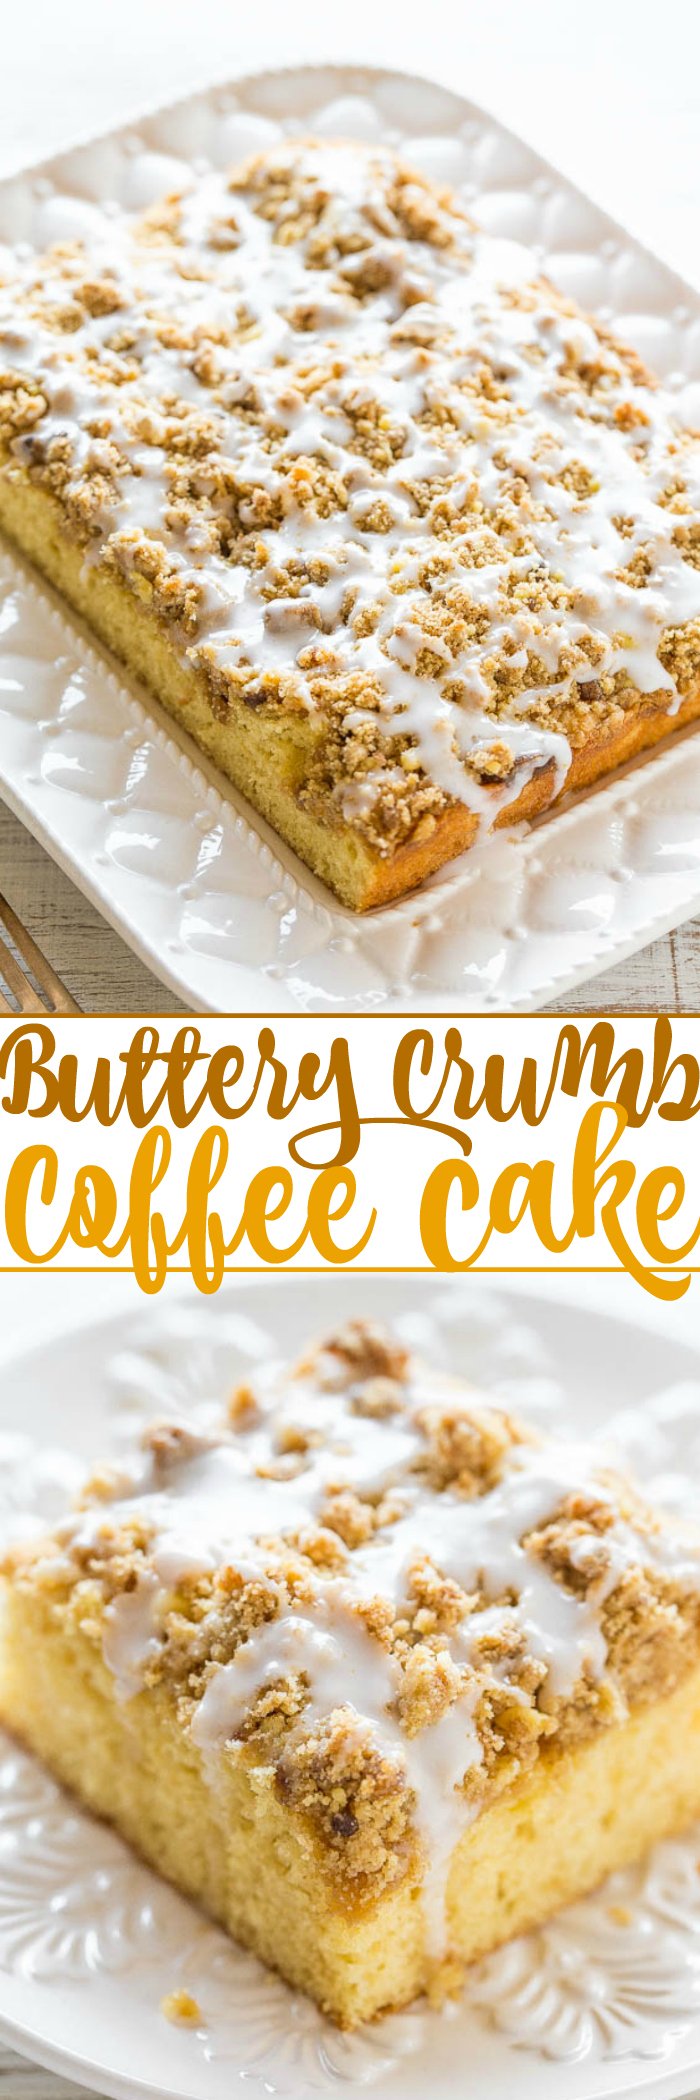 Buttery Crumb Coffee Cake - A soft, fluffy cake with cinnamon-brown sugar streusel CRUMBS and a perfectly sweet glaze!! An easy coffee cake that's perfect for brunch, holidays, or anytime you're CRAVING cake!!